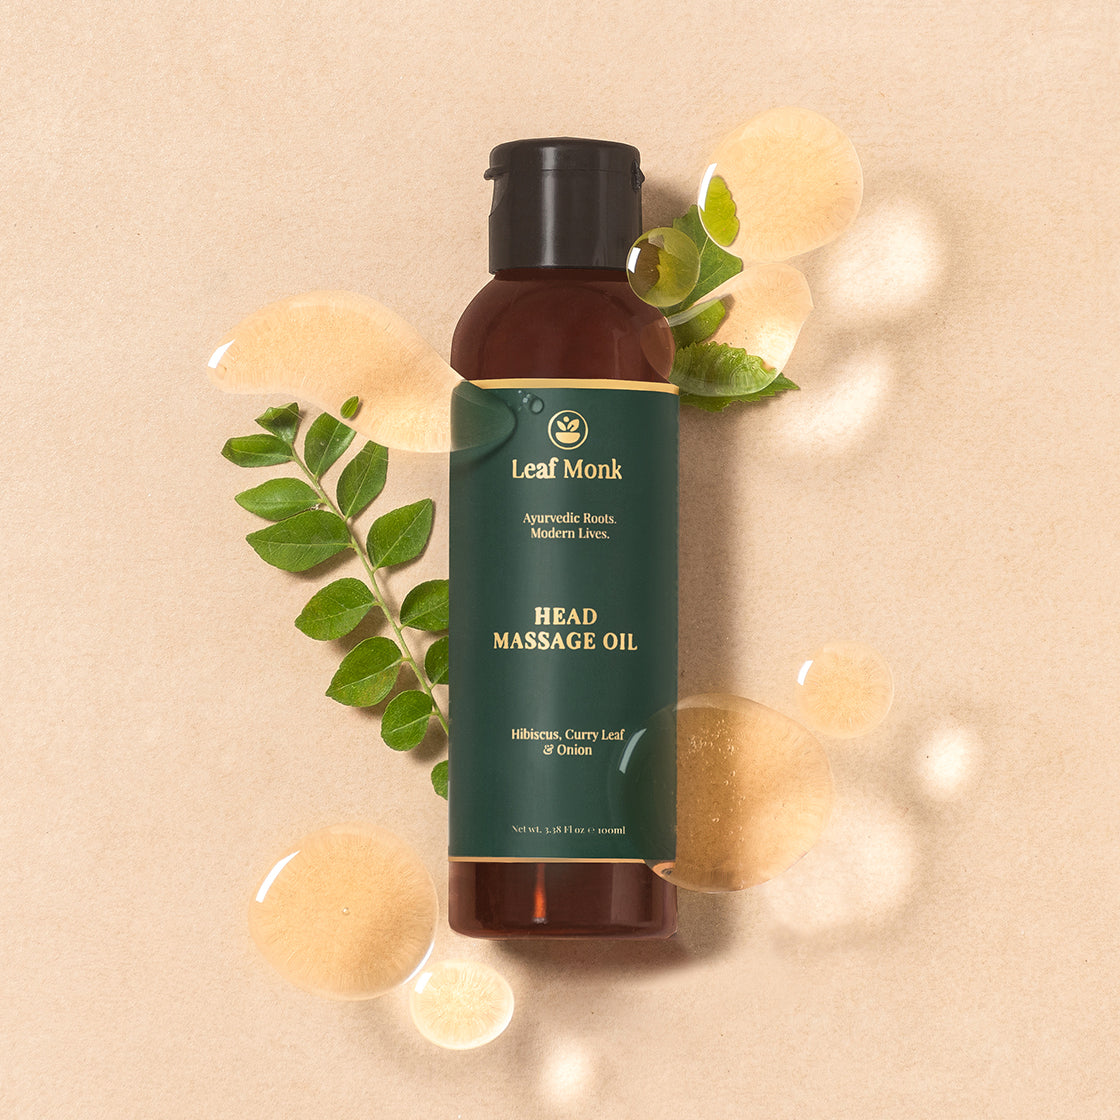 Head Massage Oil with Hibiscus, Curry Leaf & Onion